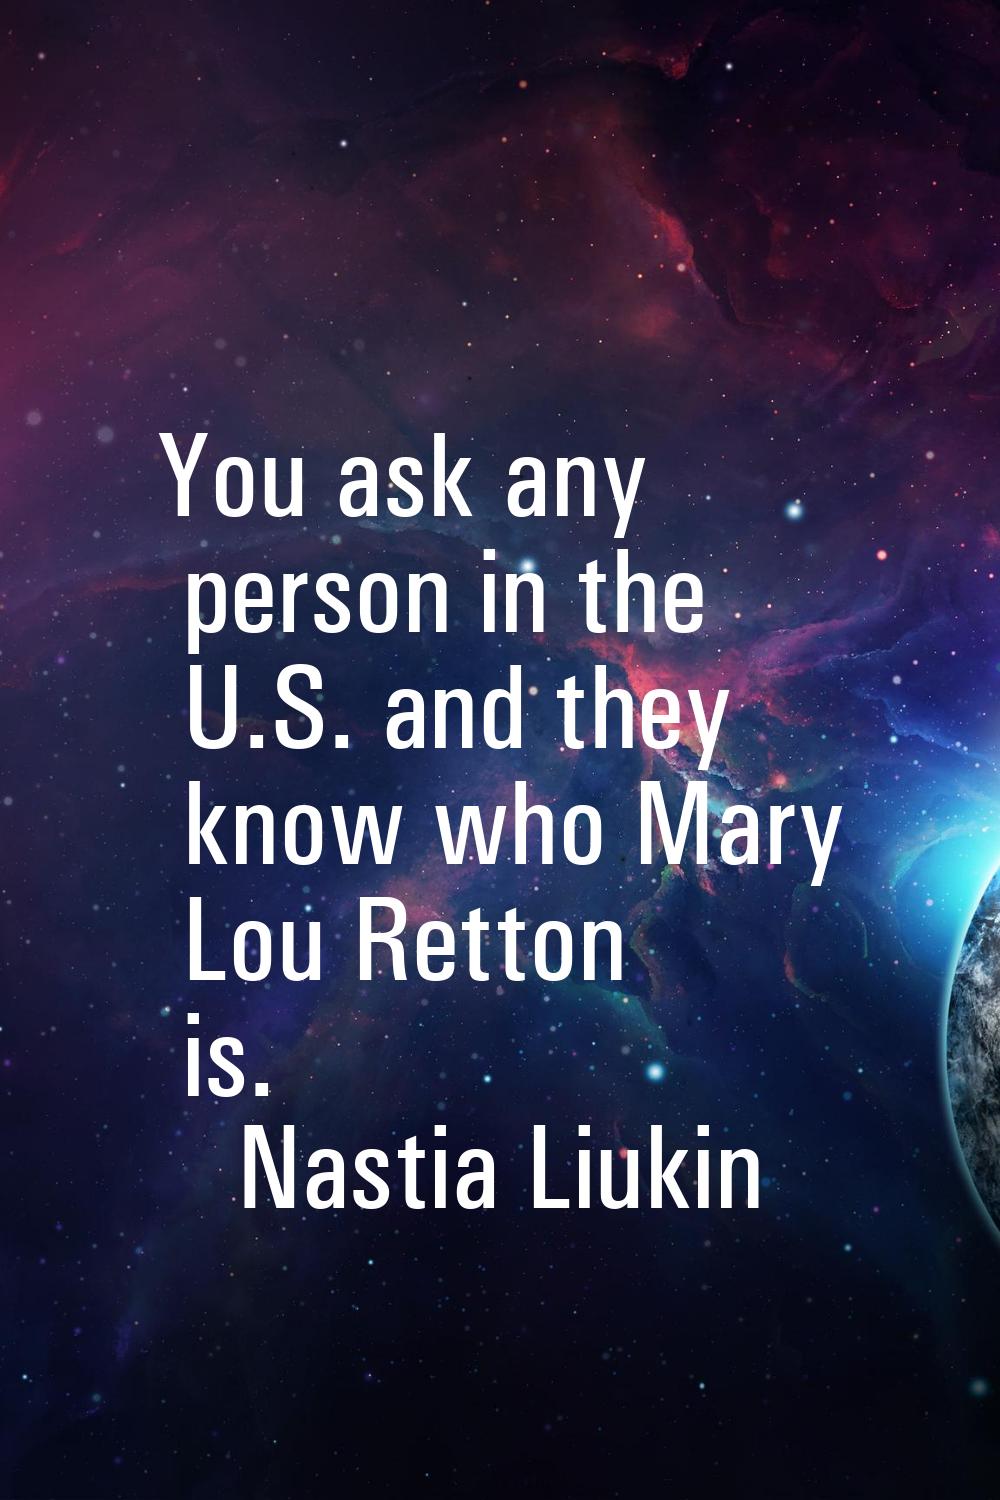 You ask any person in the U.S. and they know who Mary Lou Retton is.